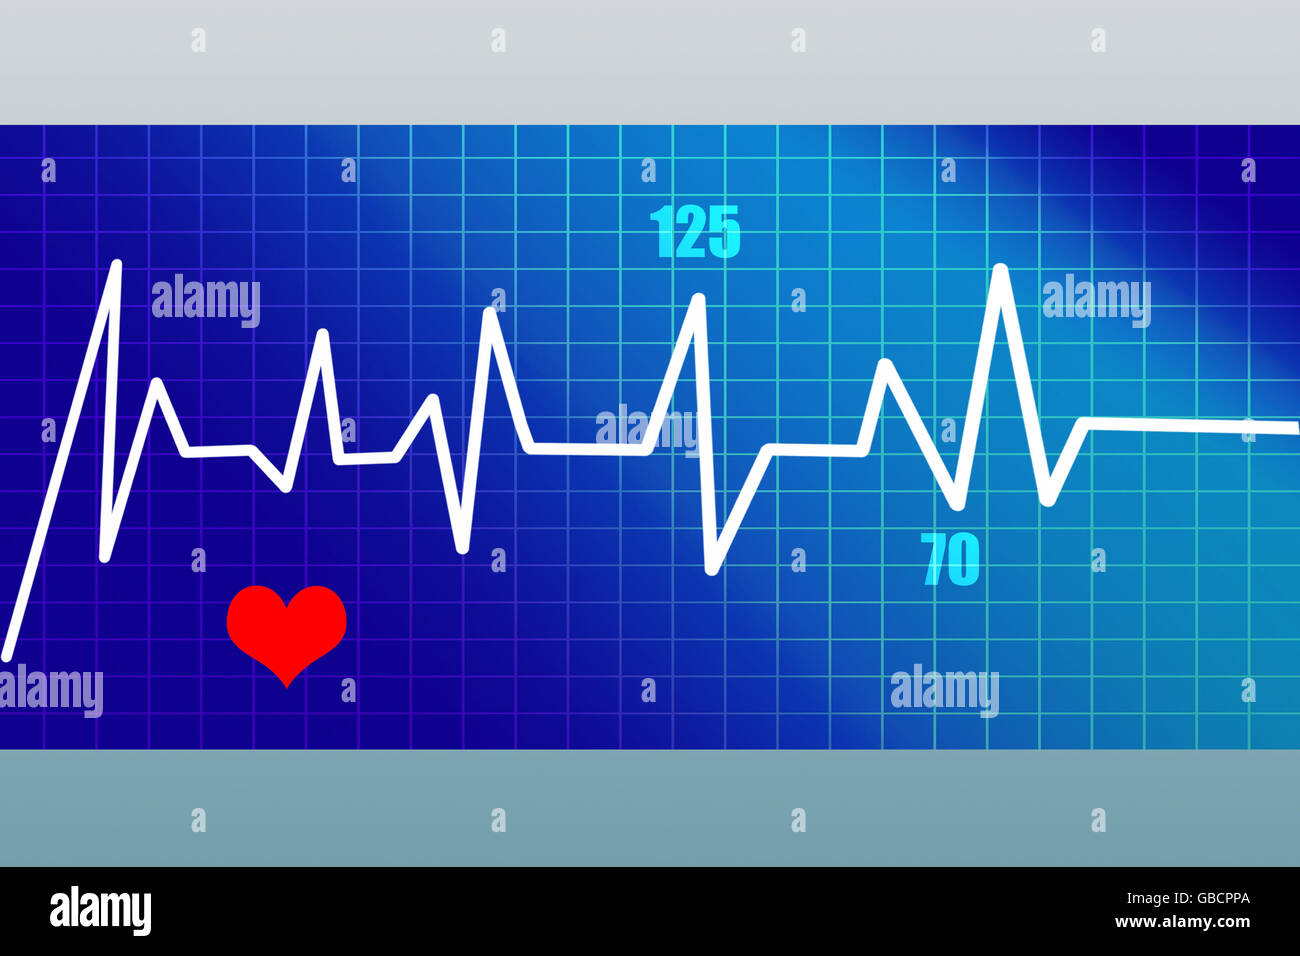 Encyclopedia Ejendomsret Settle heart beat graph with indication of blood pressure high and low Stock Photo  - Alamy